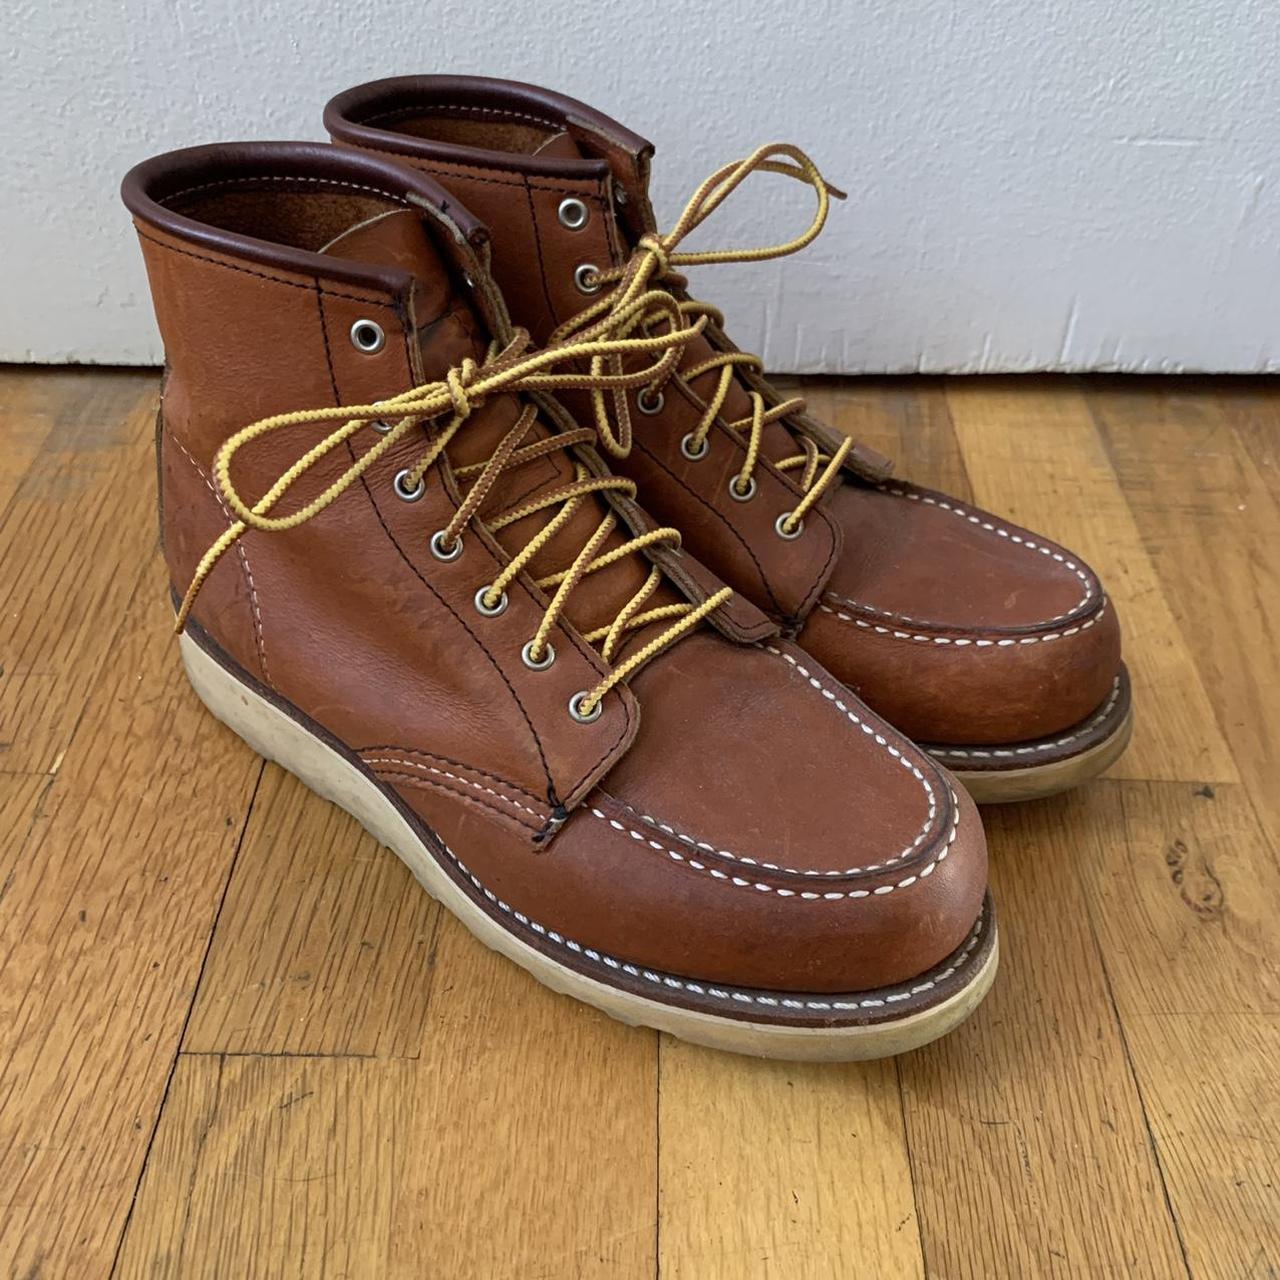 Redwing Women's Brown and Tan Boots | Depop